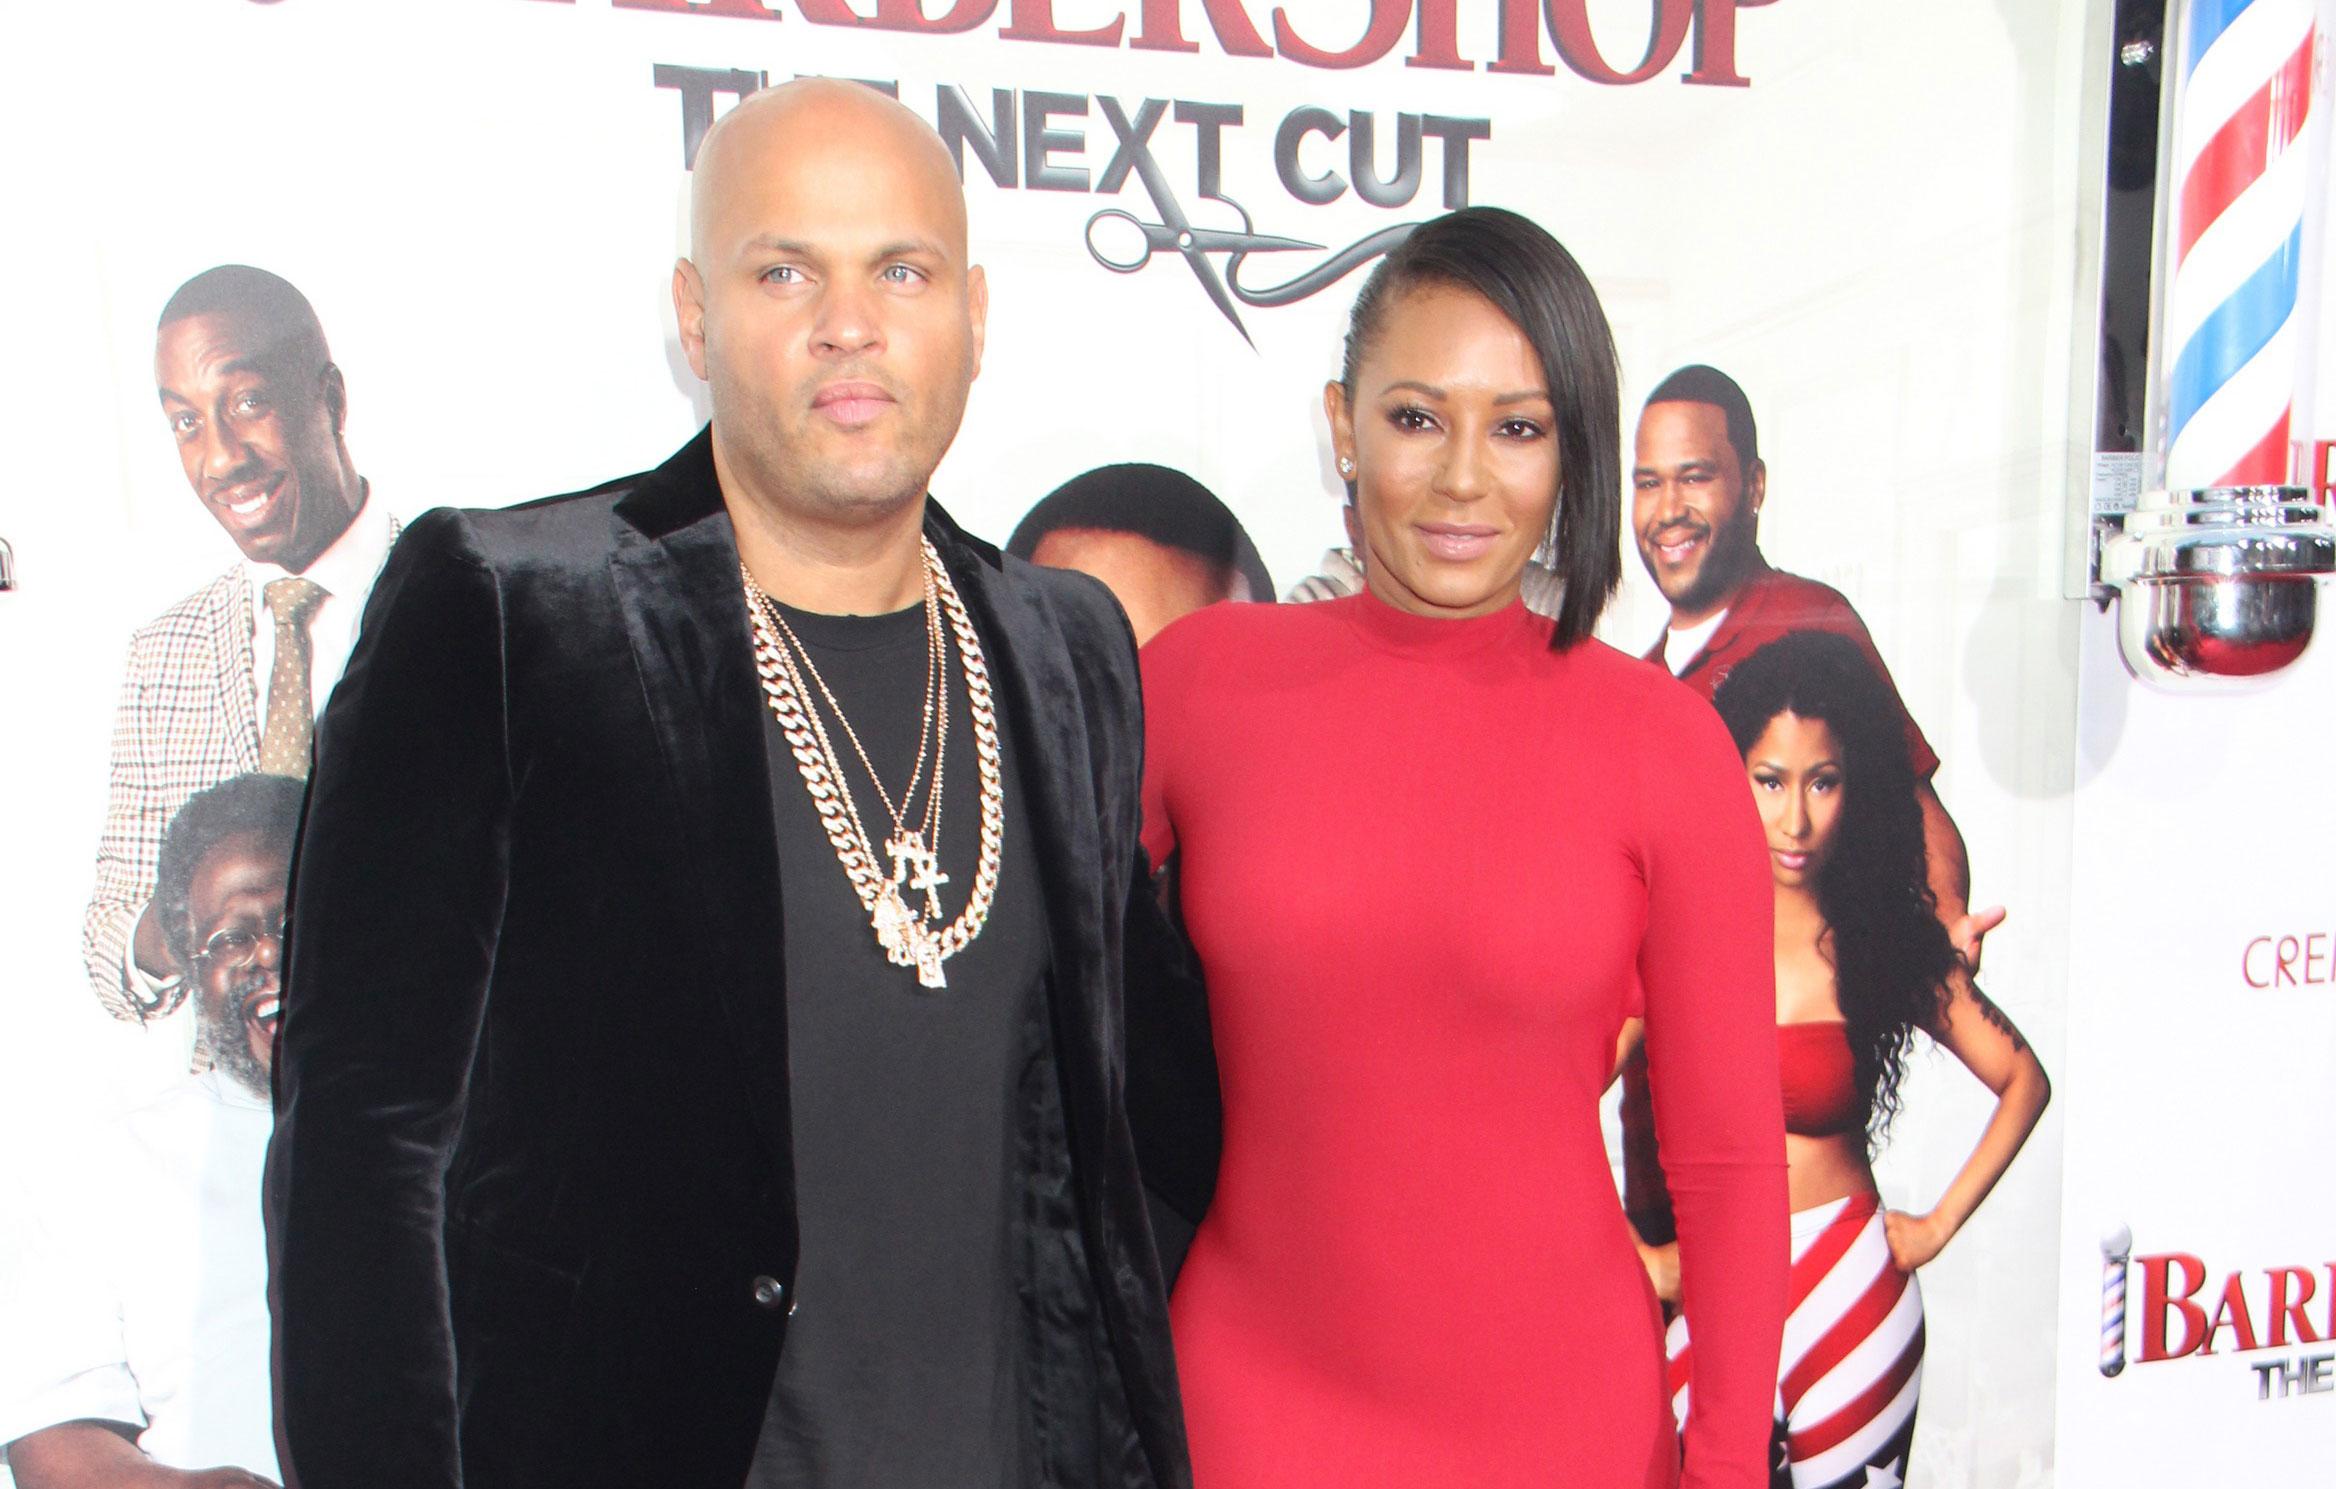 Stephen Belafonte takes a savage swipe at ex Mel B over their daughter  Madison